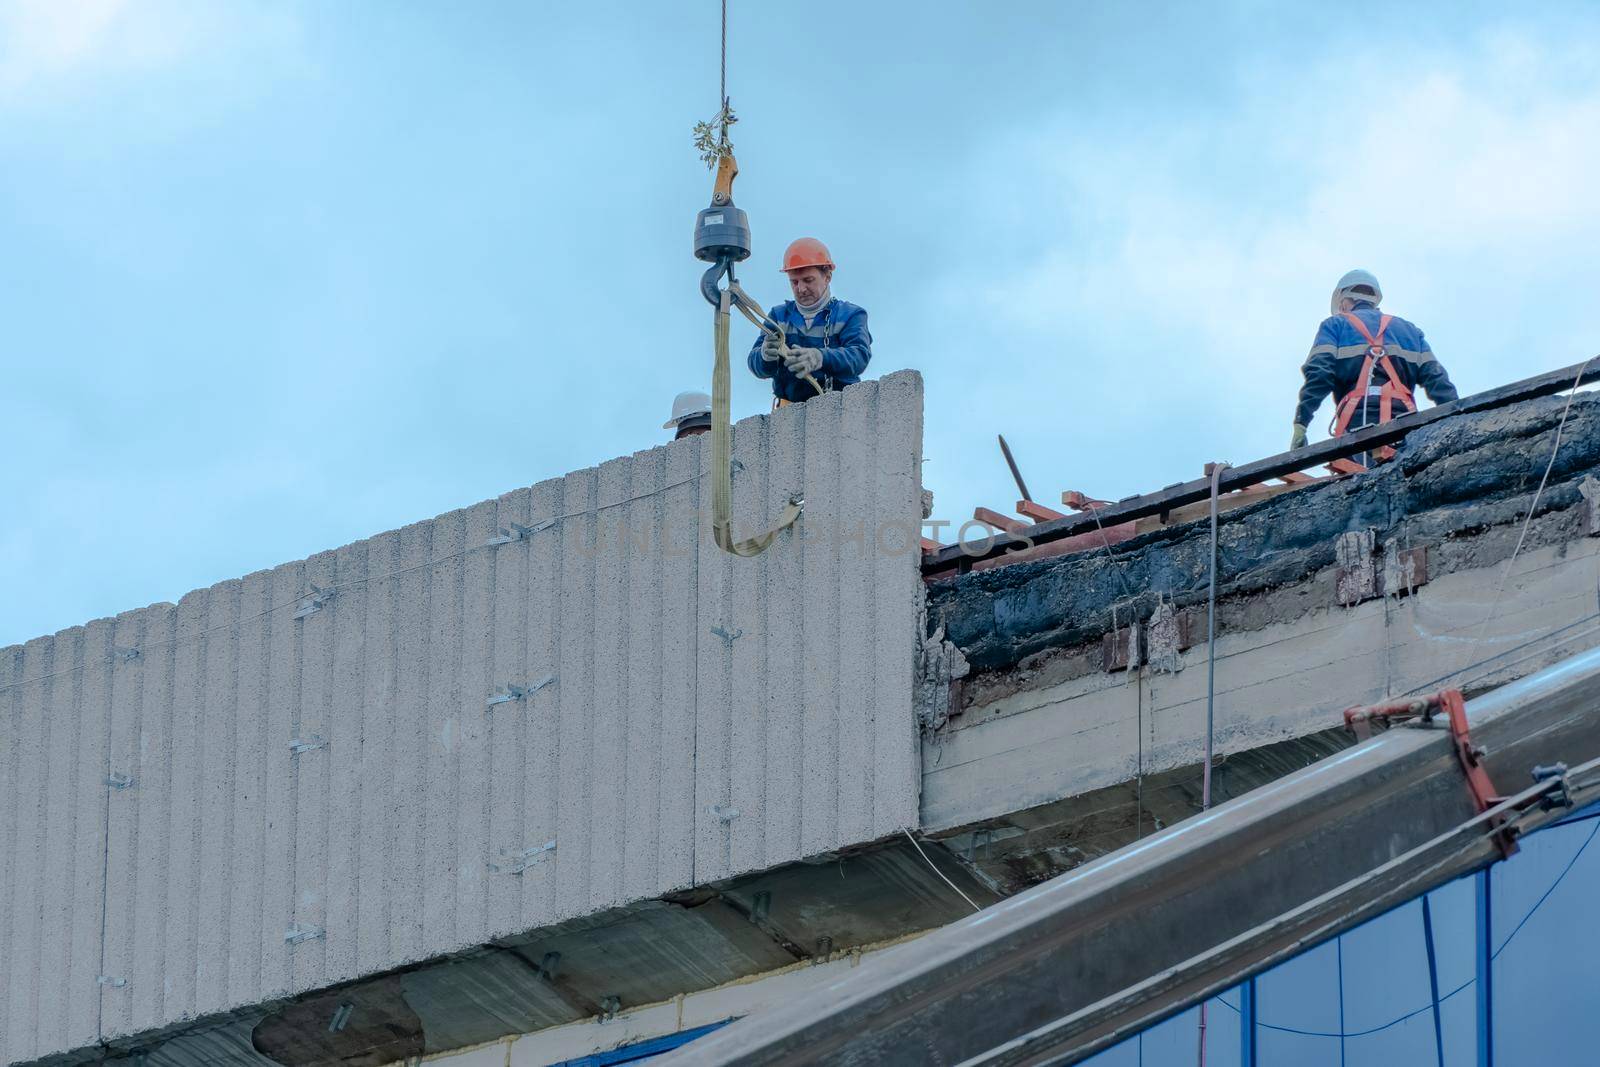 Moscow,Russia,05,10,2021:Restoration,reconstruction and repair of the building.Construction workers in hard hats install concrete slabs on the roof of the structure.Housing Restoration Construction by YevgeniySam